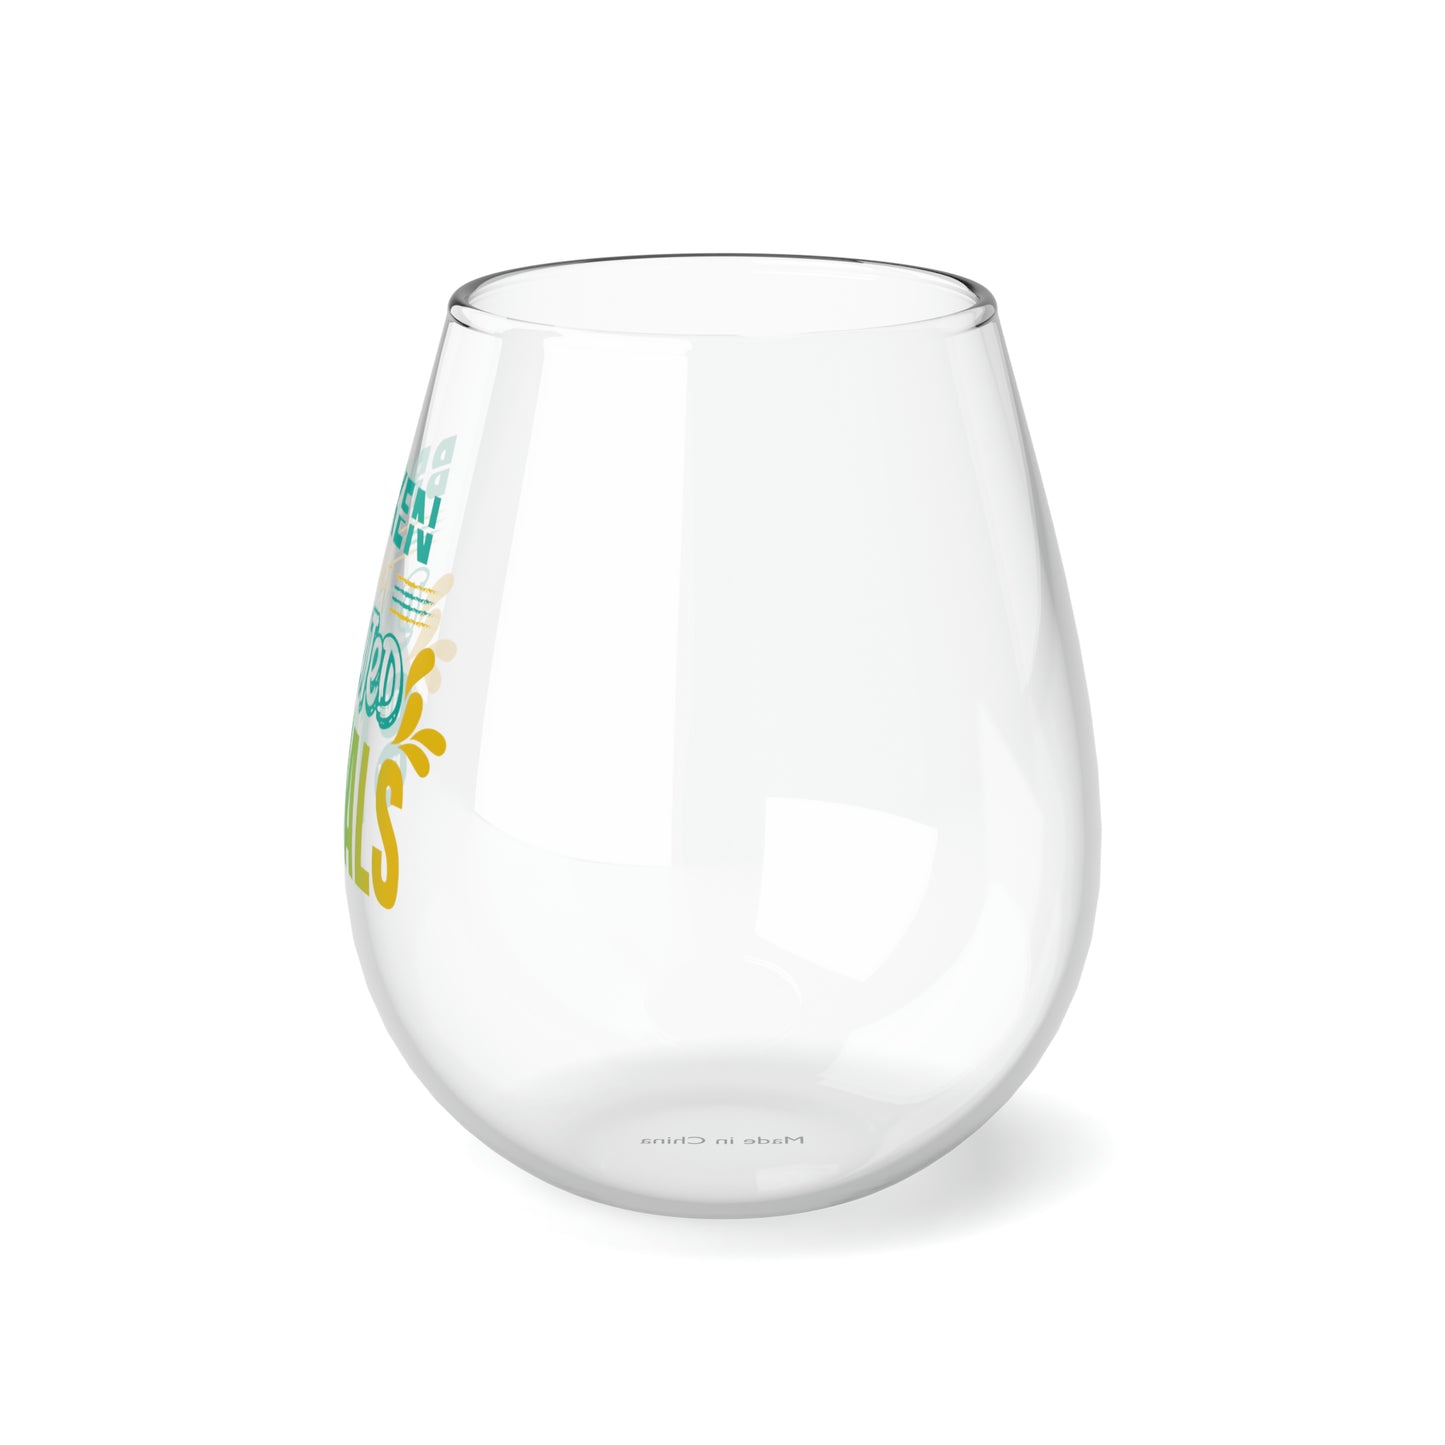 Broken But Not Defeated By My Trials Stemless Wine Glass, 11.75oz